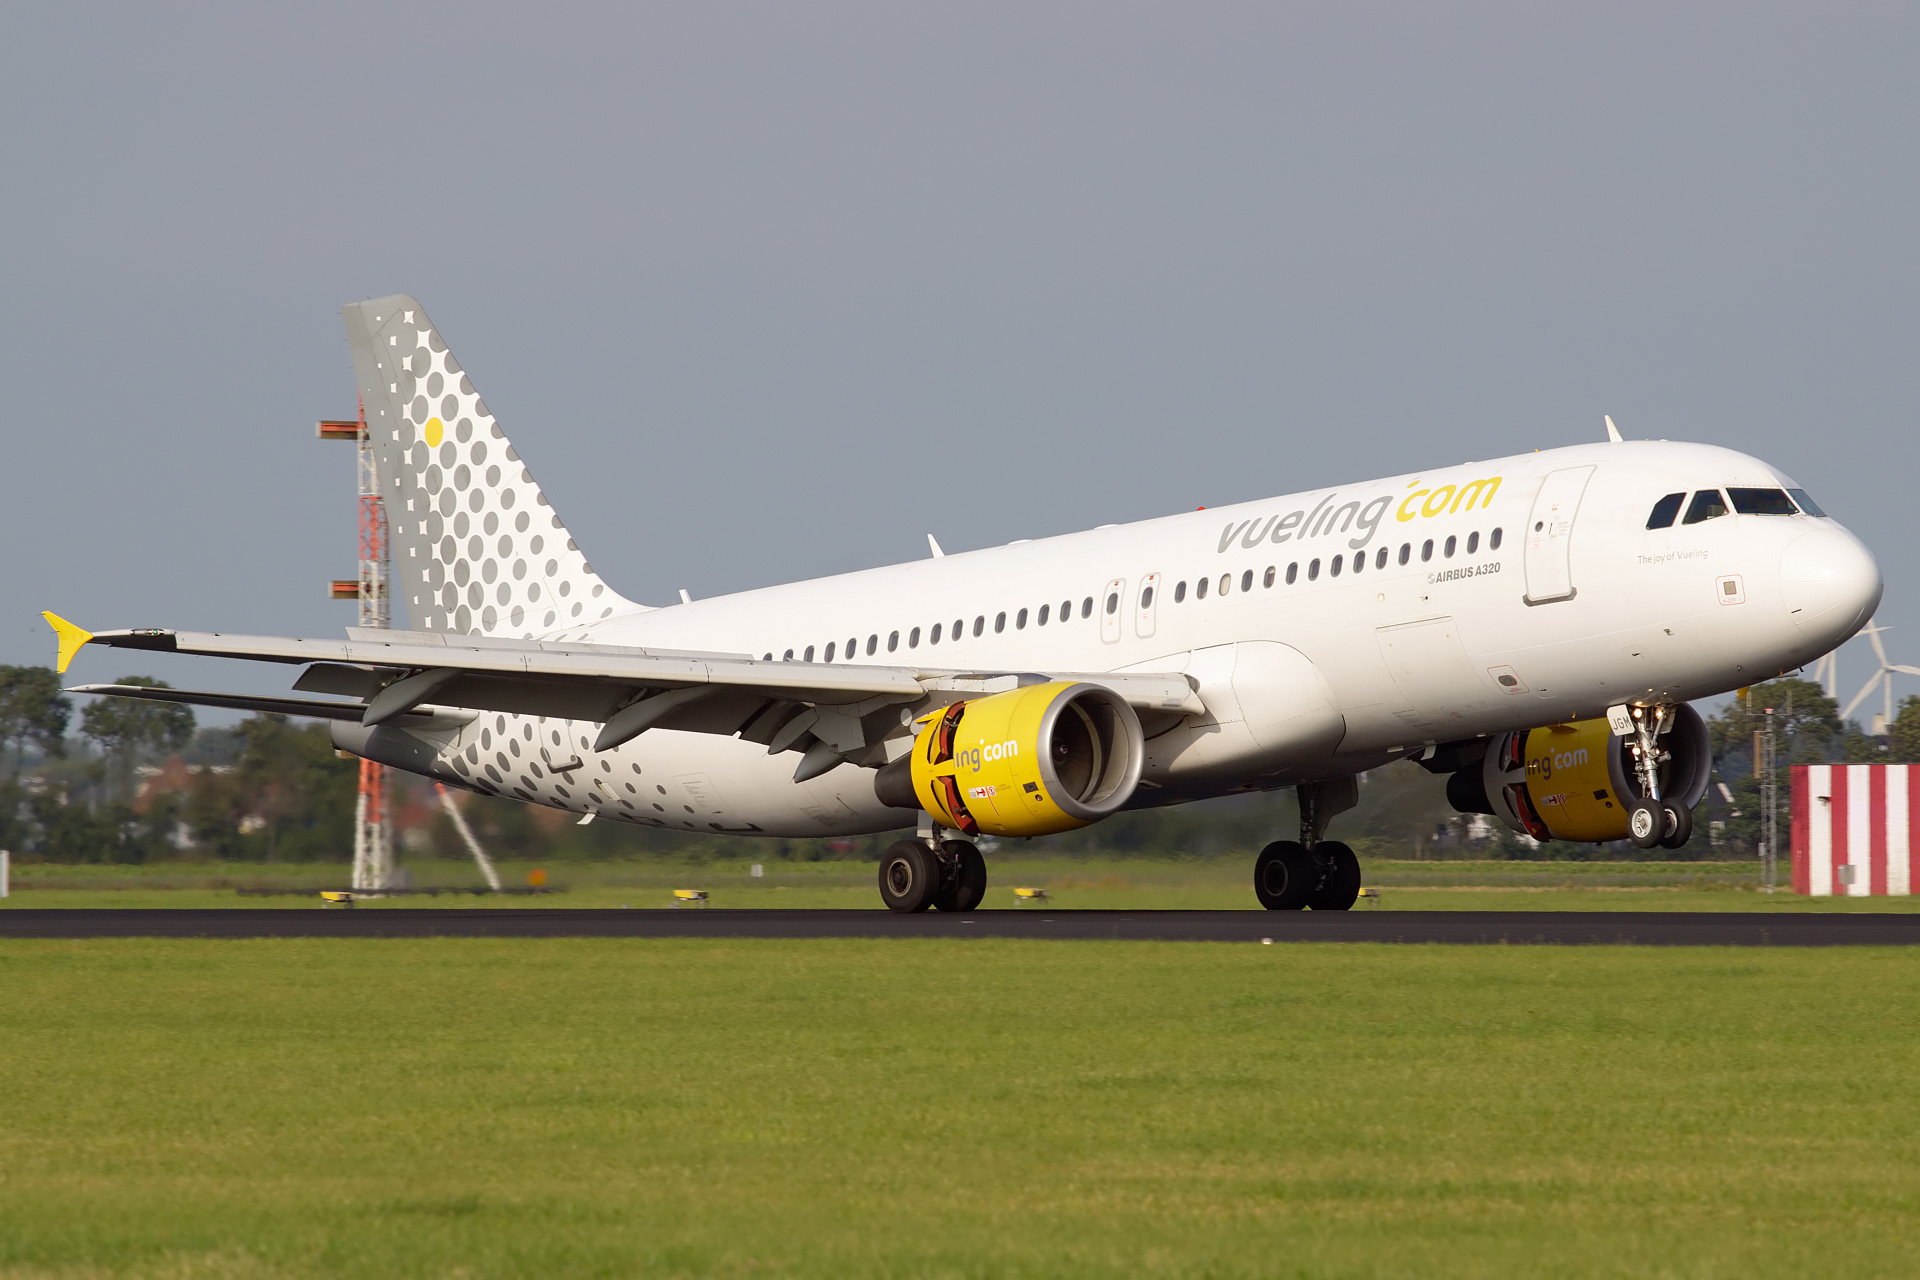 EC-JGM (Aircraft » Schiphol Spotting » Airbus A320-200 » Vueling Airlines)